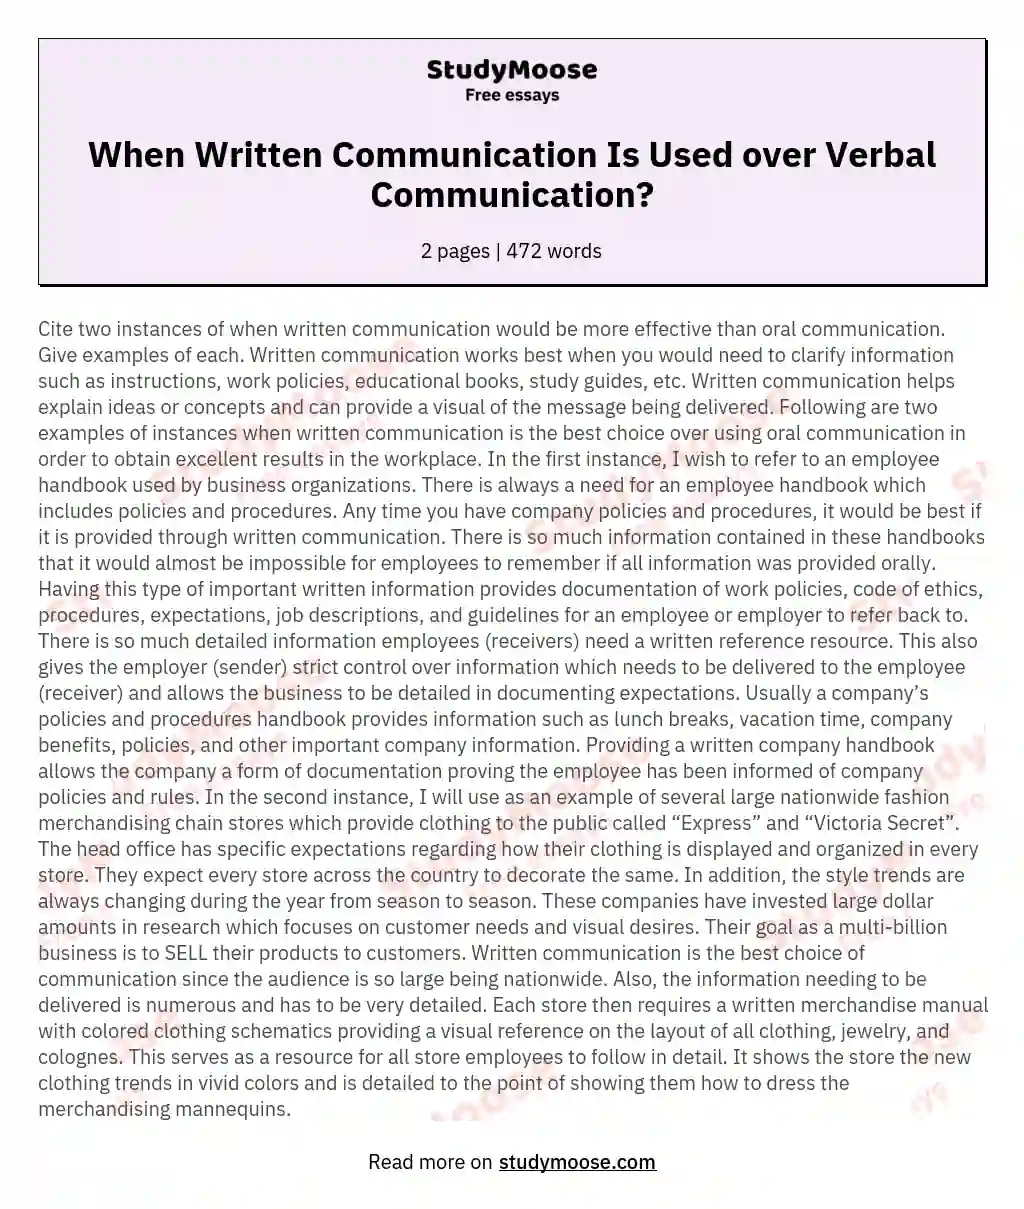 When Written Communication Is Used over Verbal Communication?